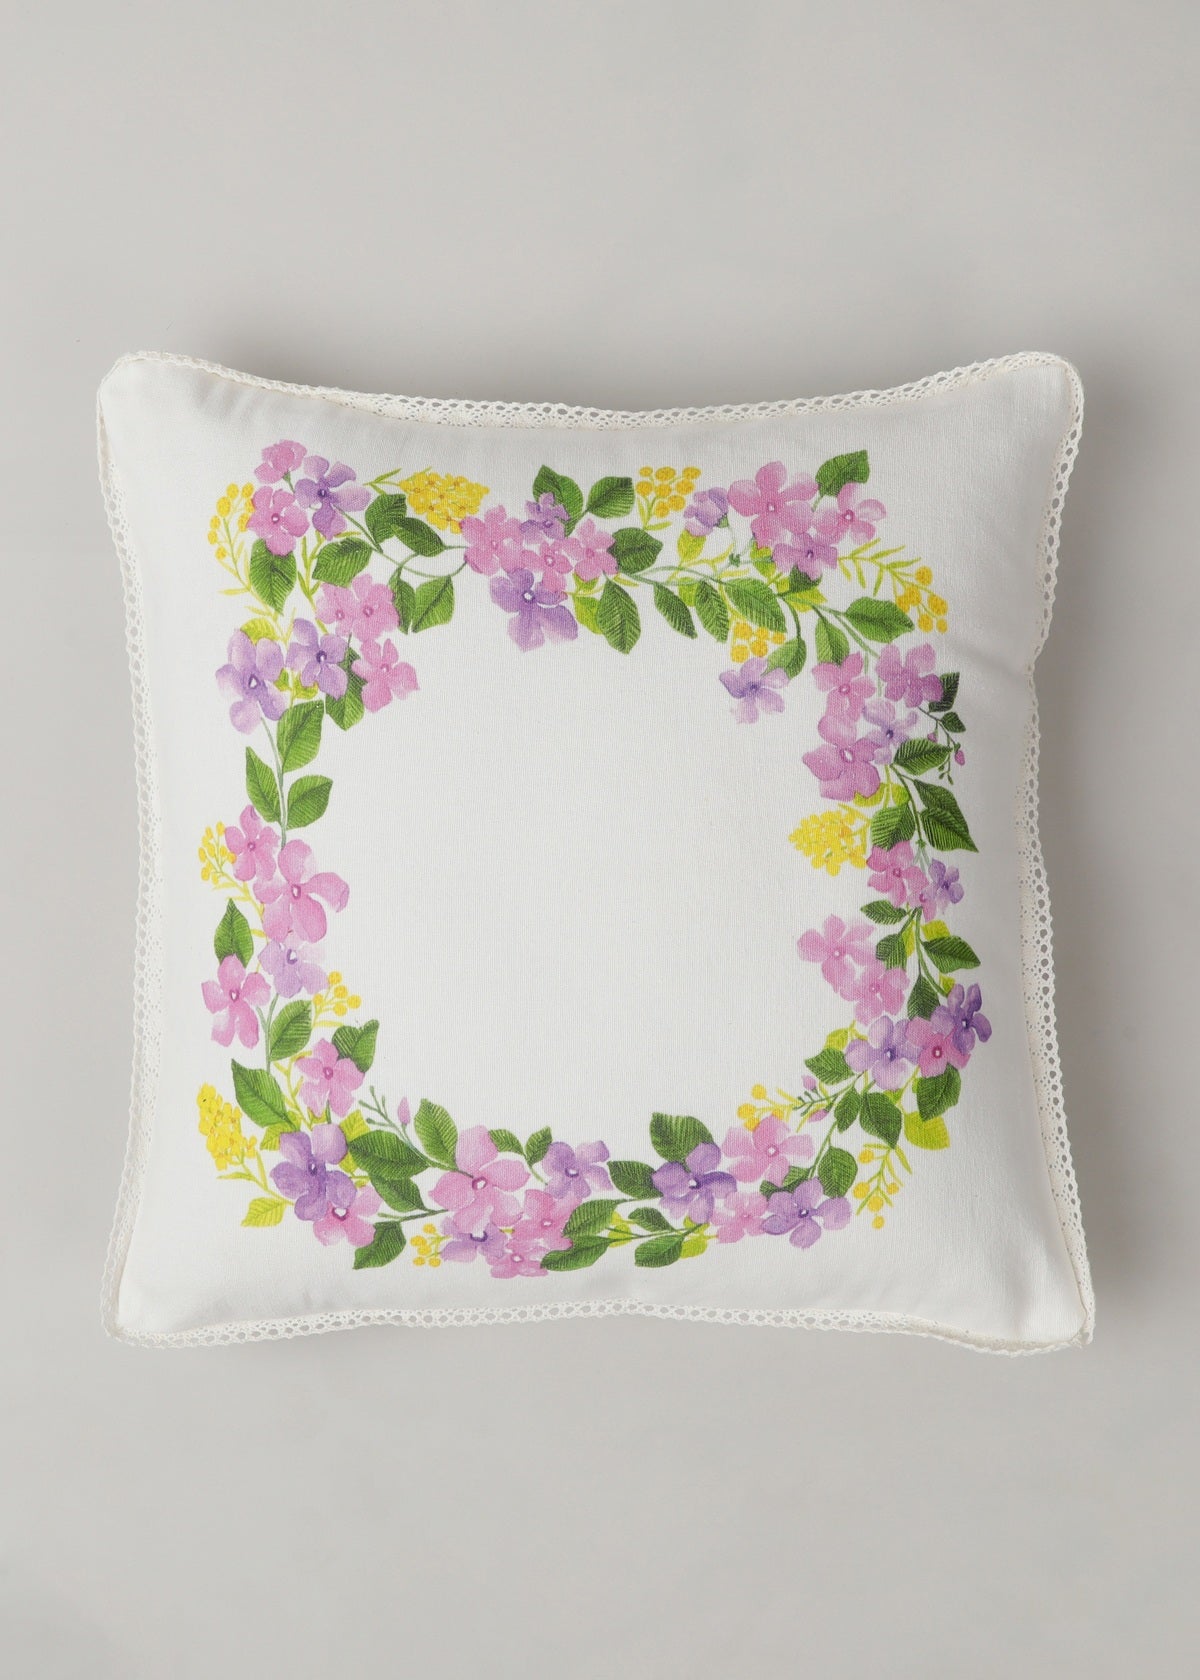 Very Peri Wreath, Dusty Lavender, Solid Primrose Yellow, Climbing Roses Lavender Set Of 4 Combo Cotton Cushion Cover - Yellow And Lavender